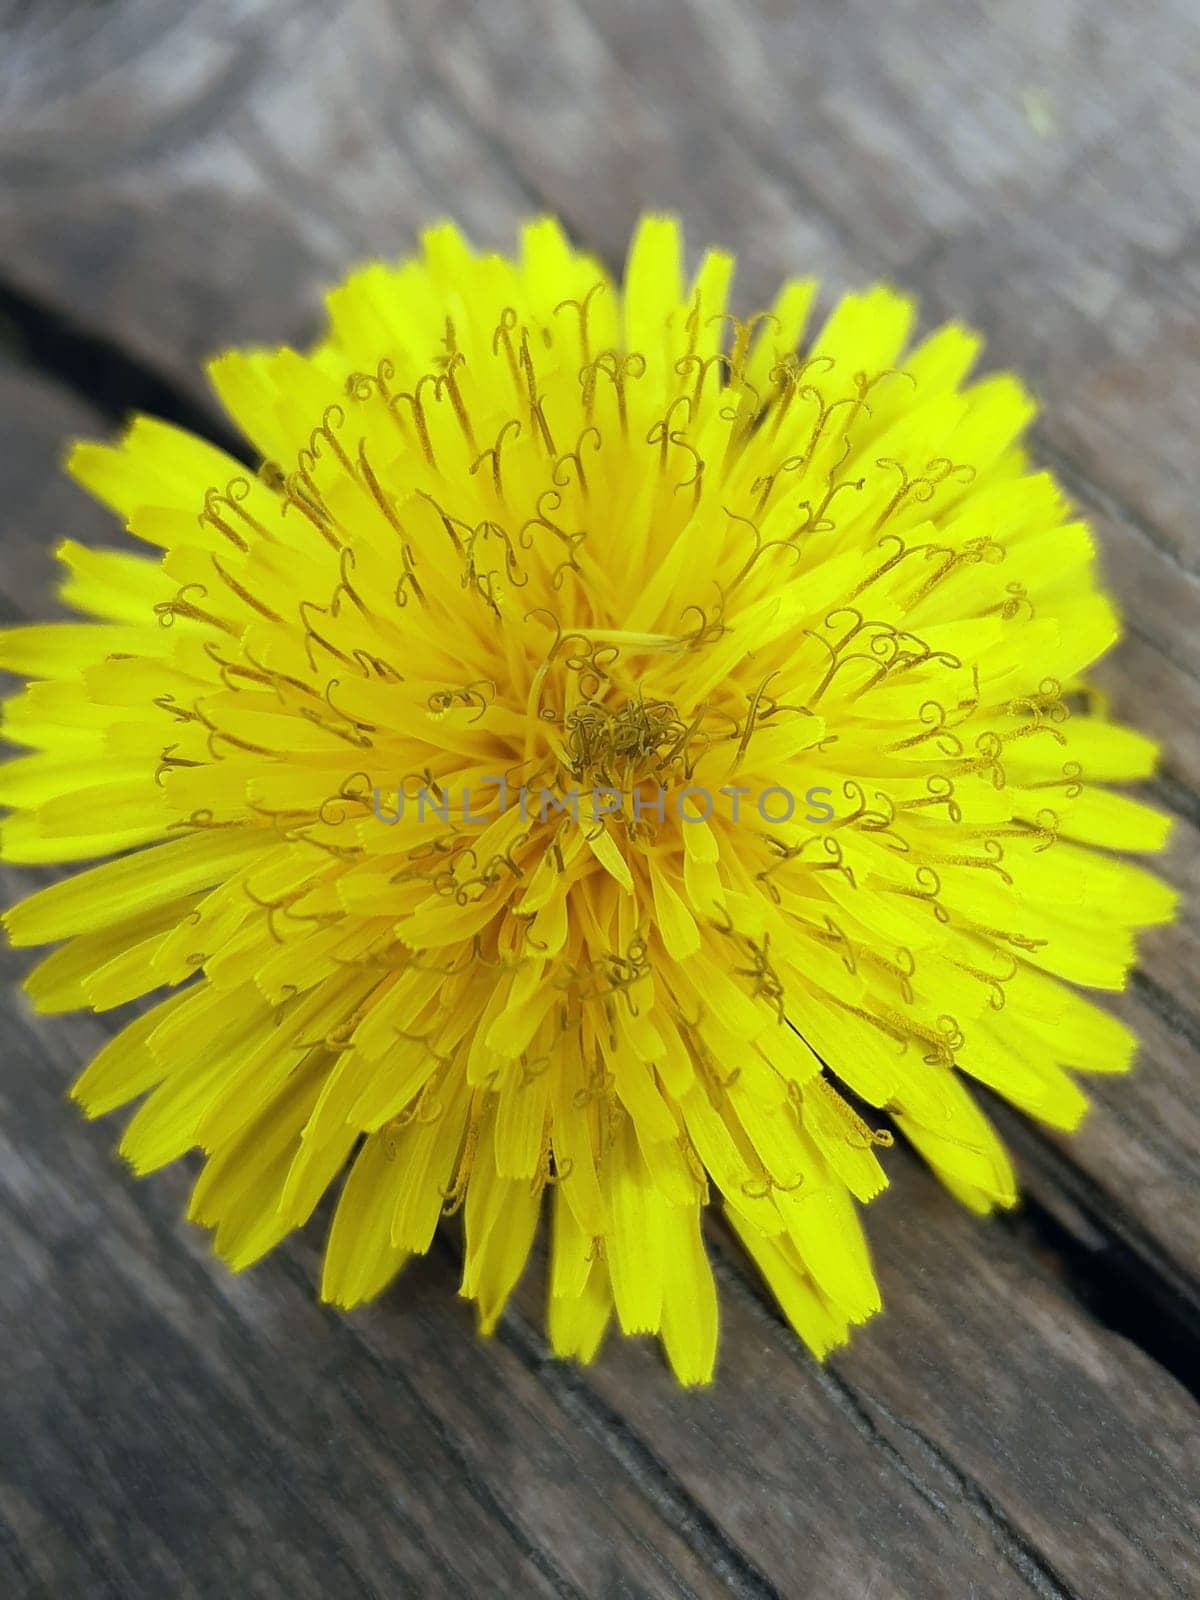 Yellow dandelion flower on a wooden stump in early spring in the park close-up.Dandelion.